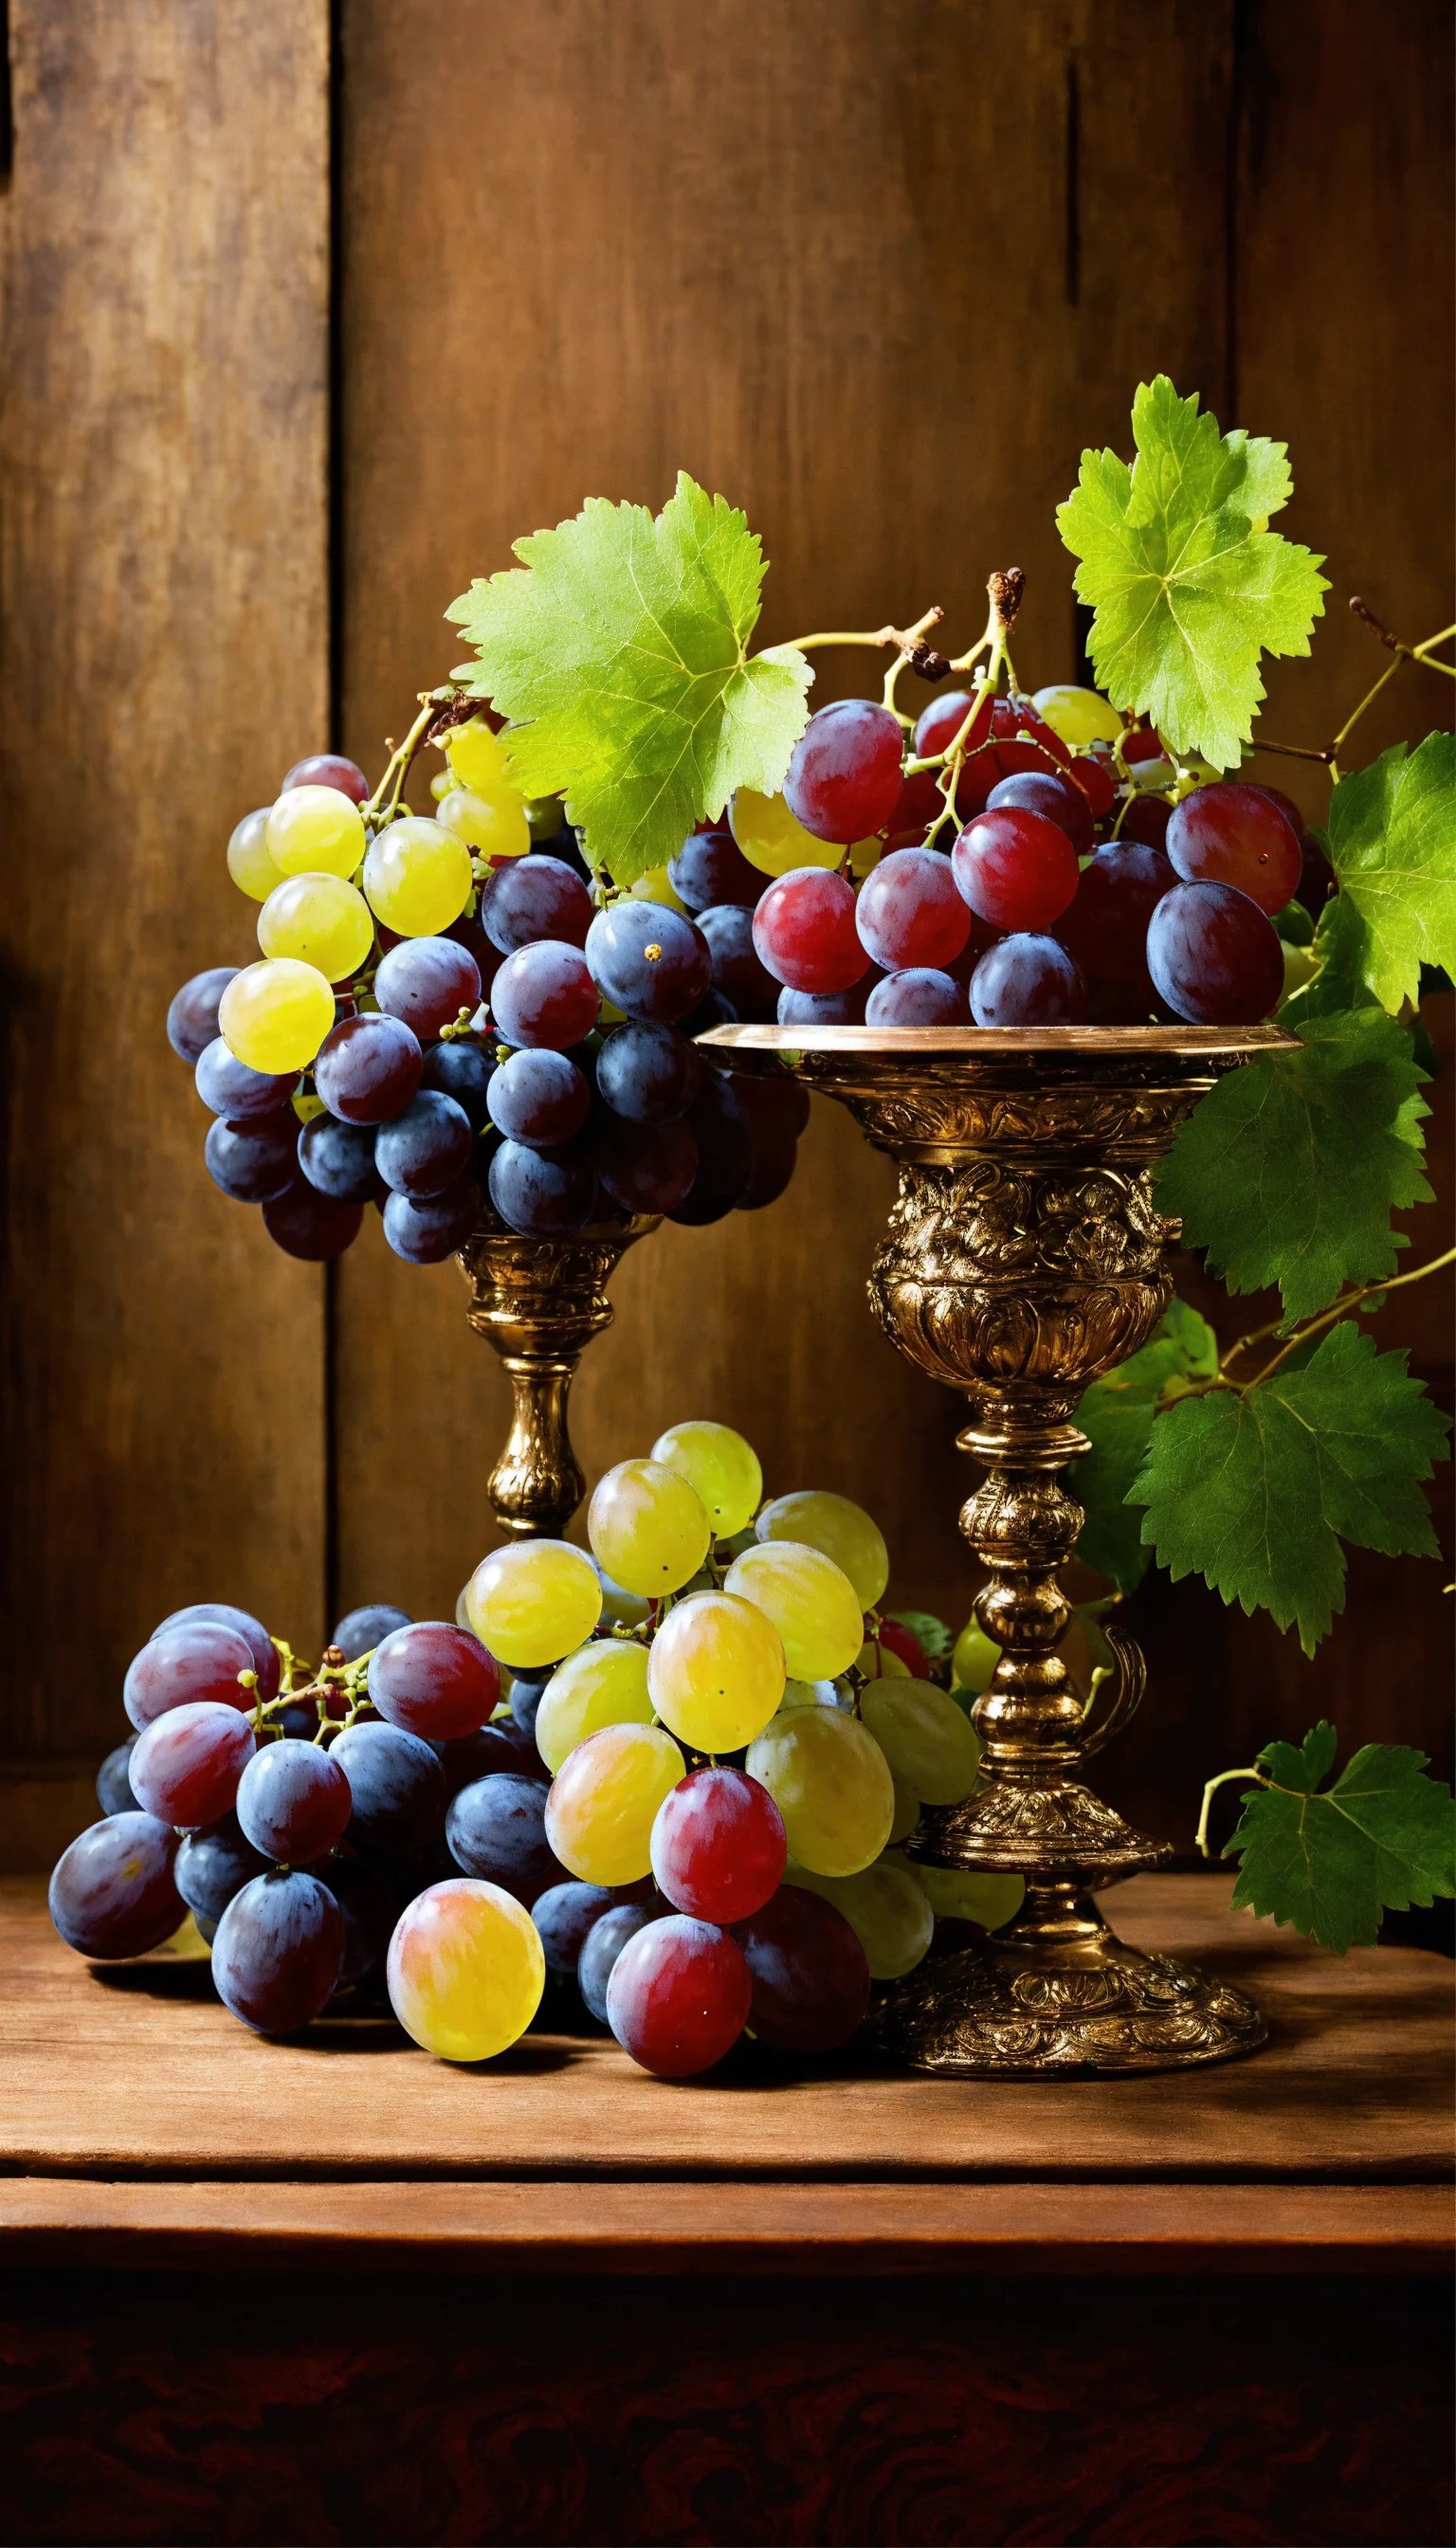 Bunches of grapes are scattered on a table.jpg